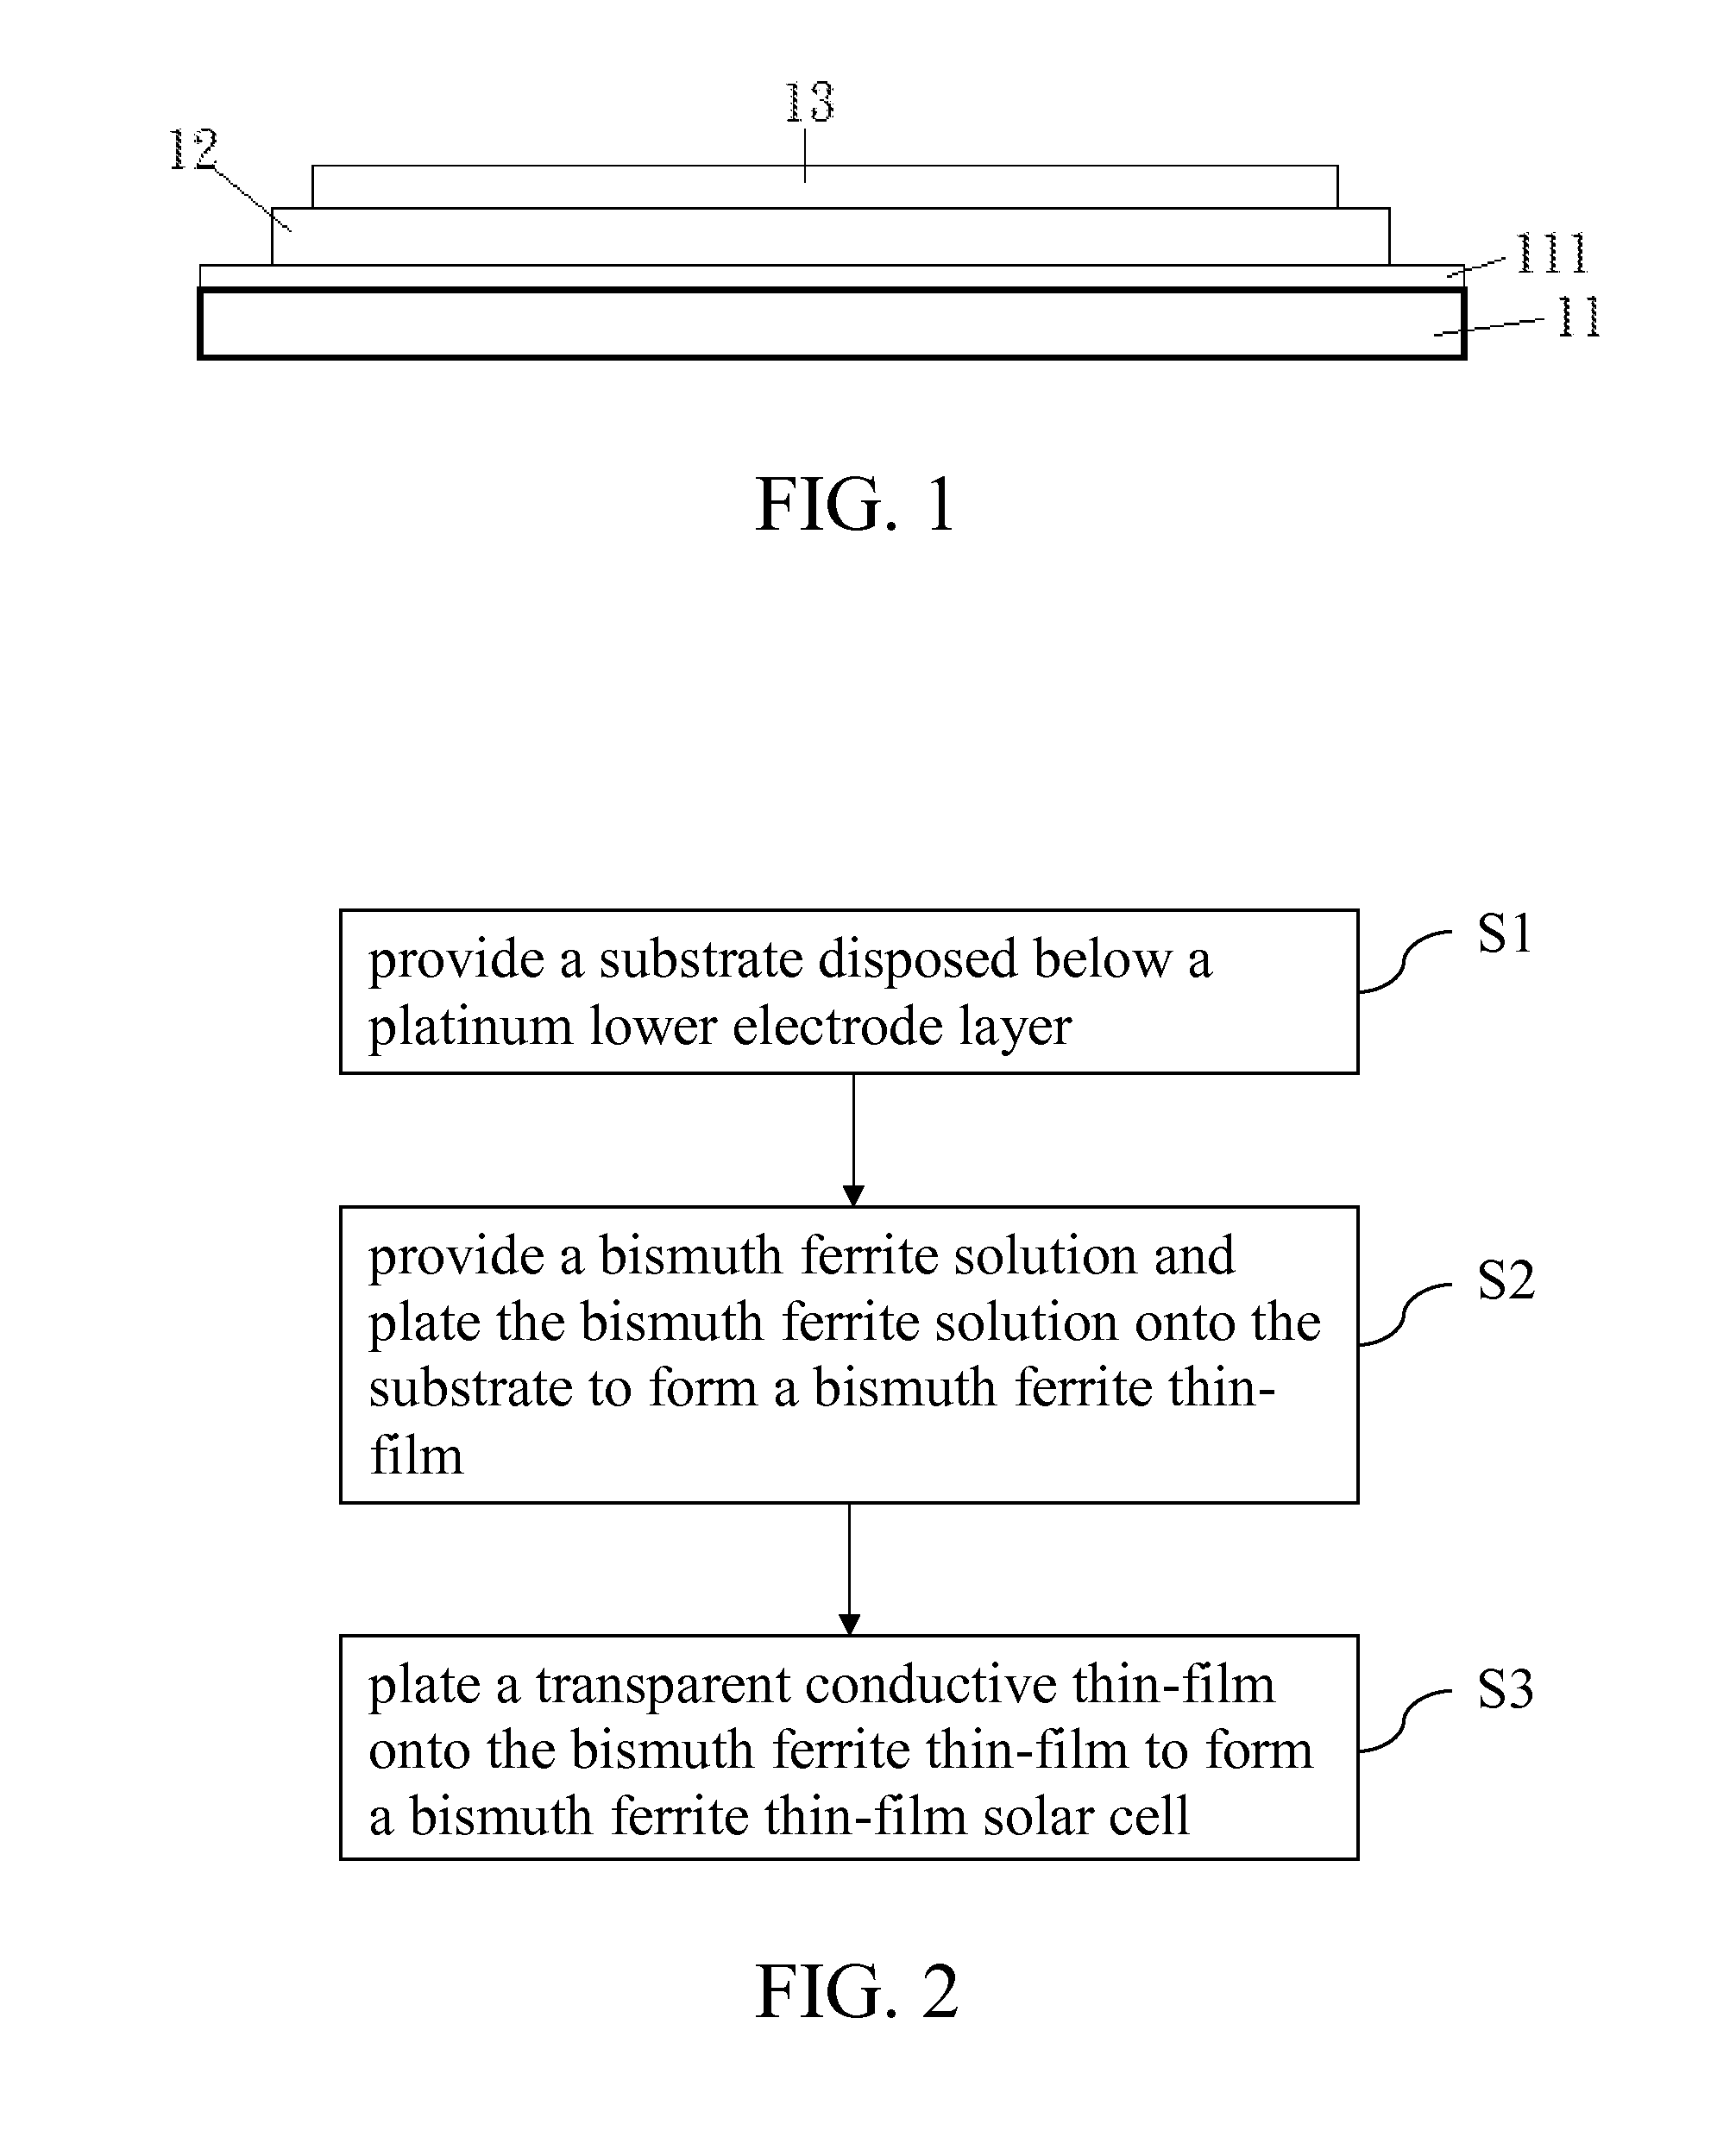 Bismuth ferrite thin-film solar cell and method of manufacturing the same